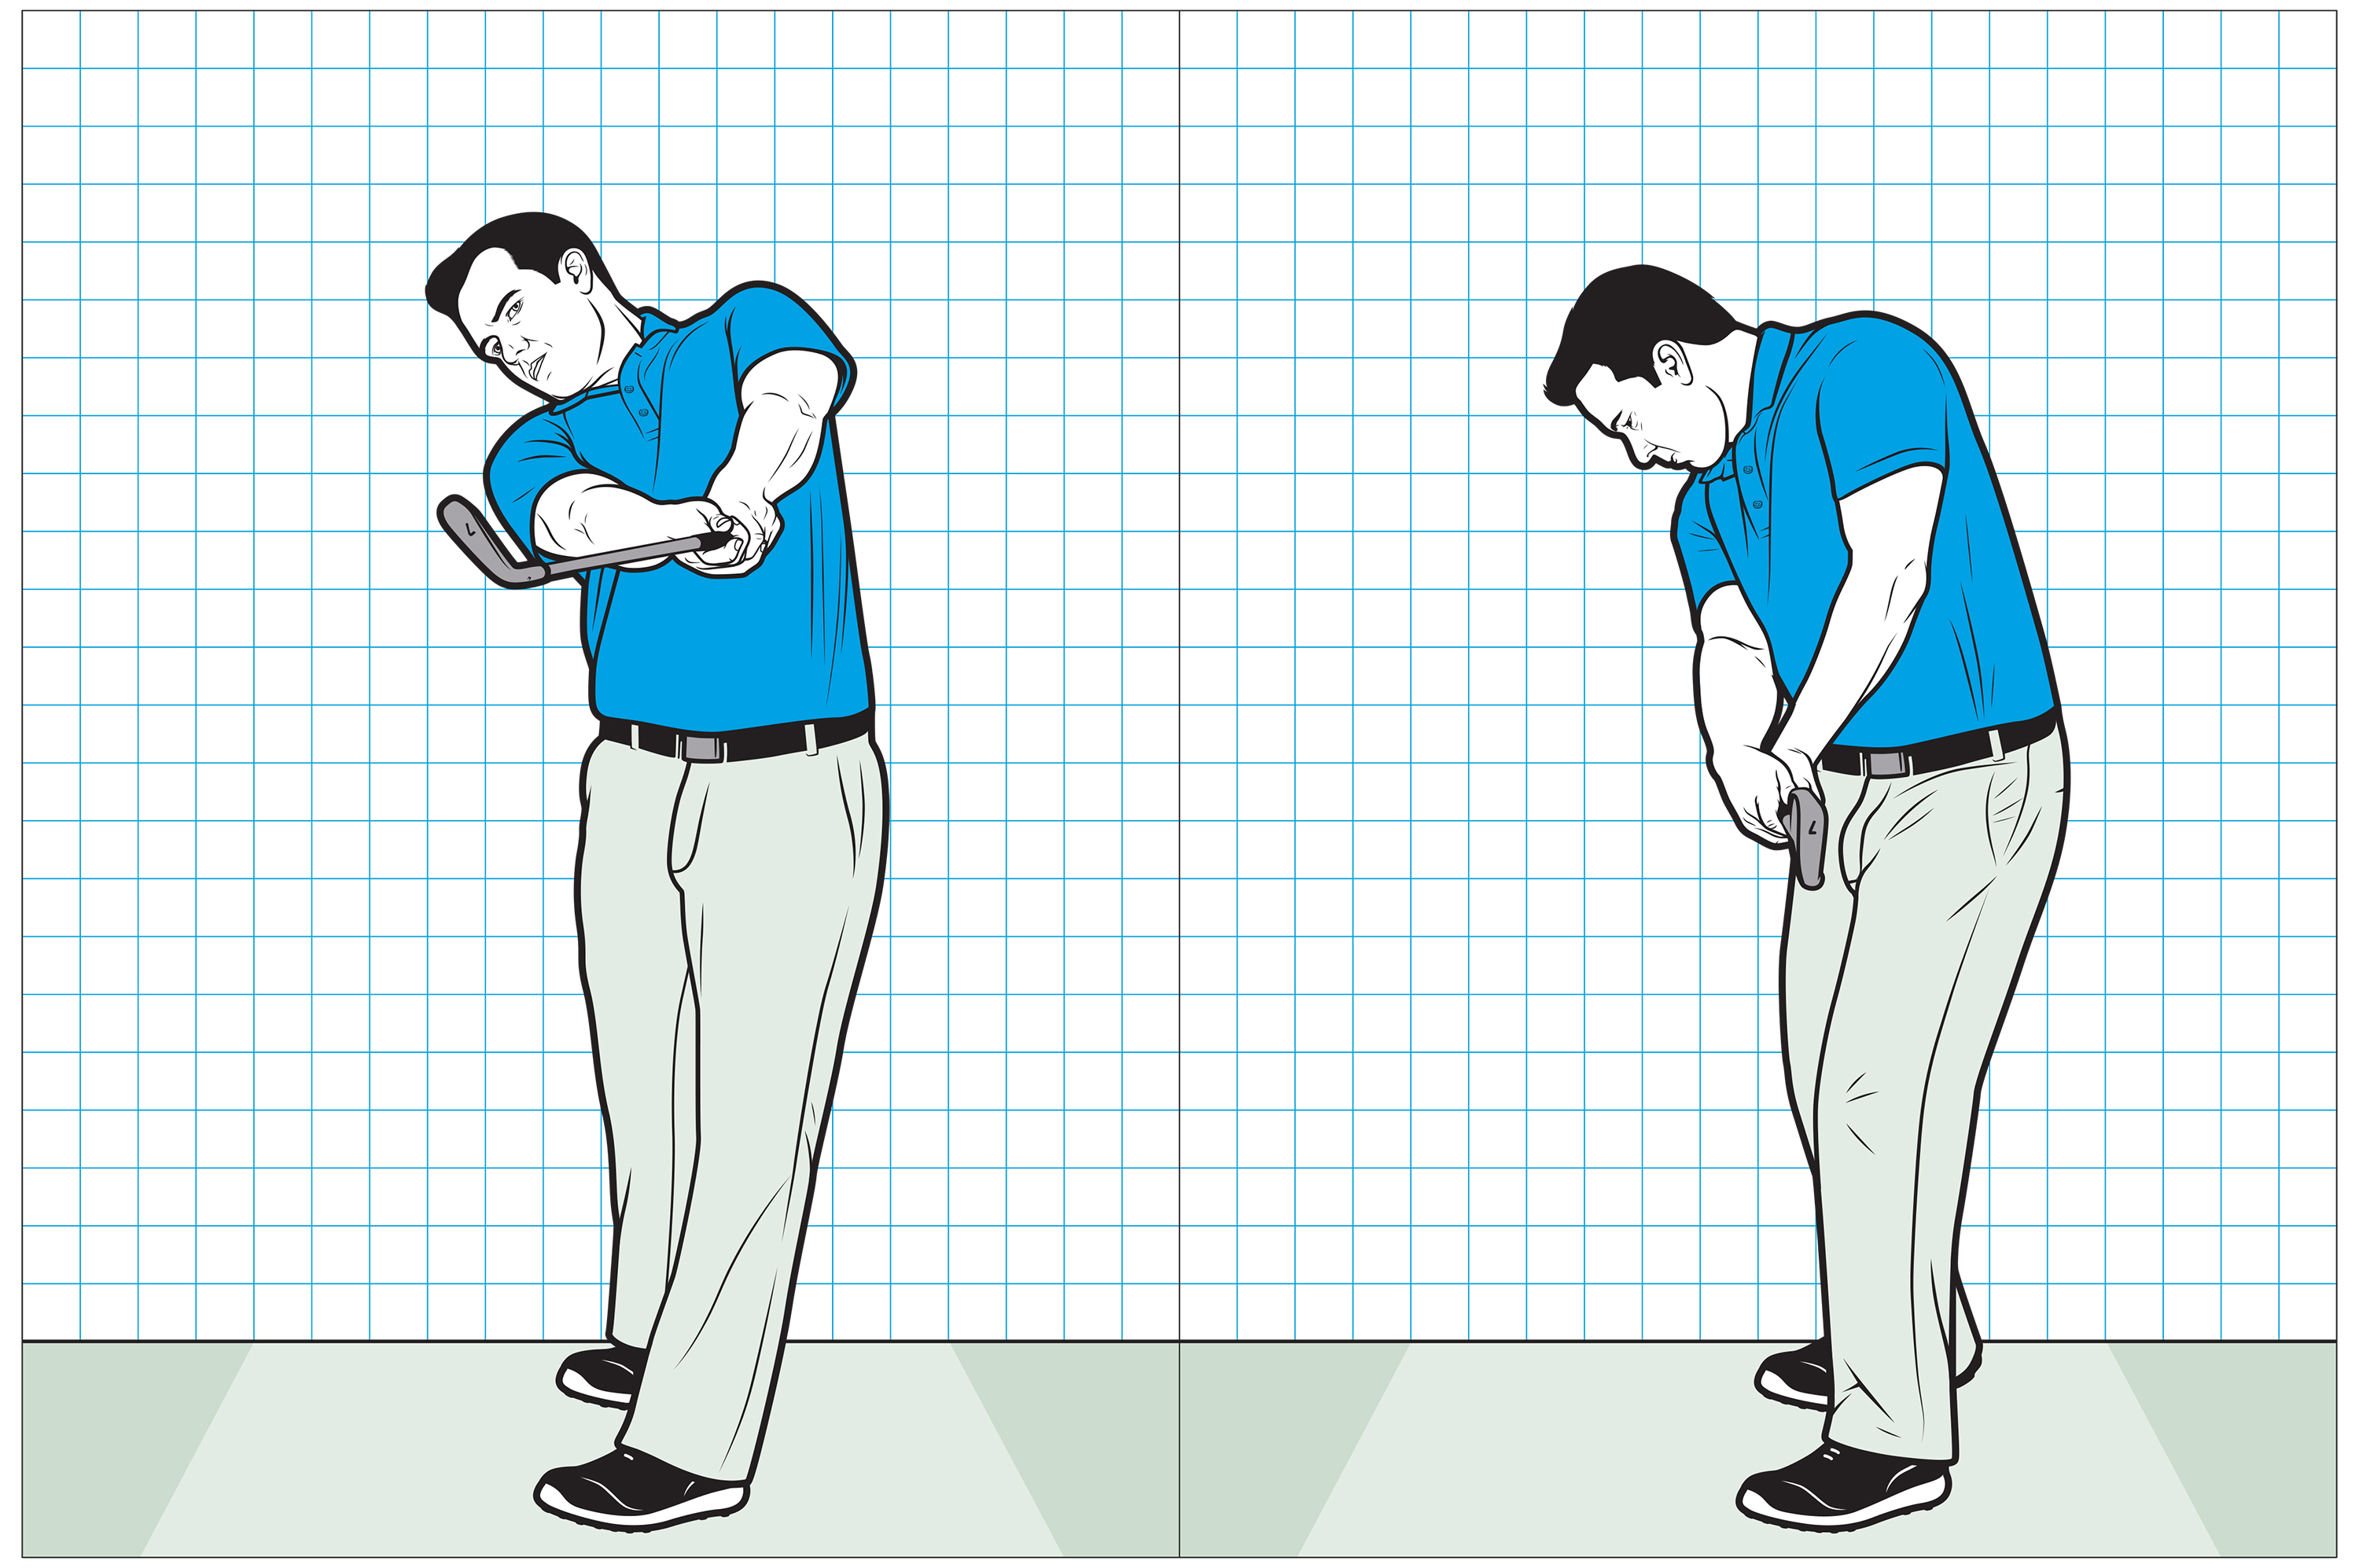 Why "Keeping Your Head Down" Is Killing Your Swing | How To | Golf Digest